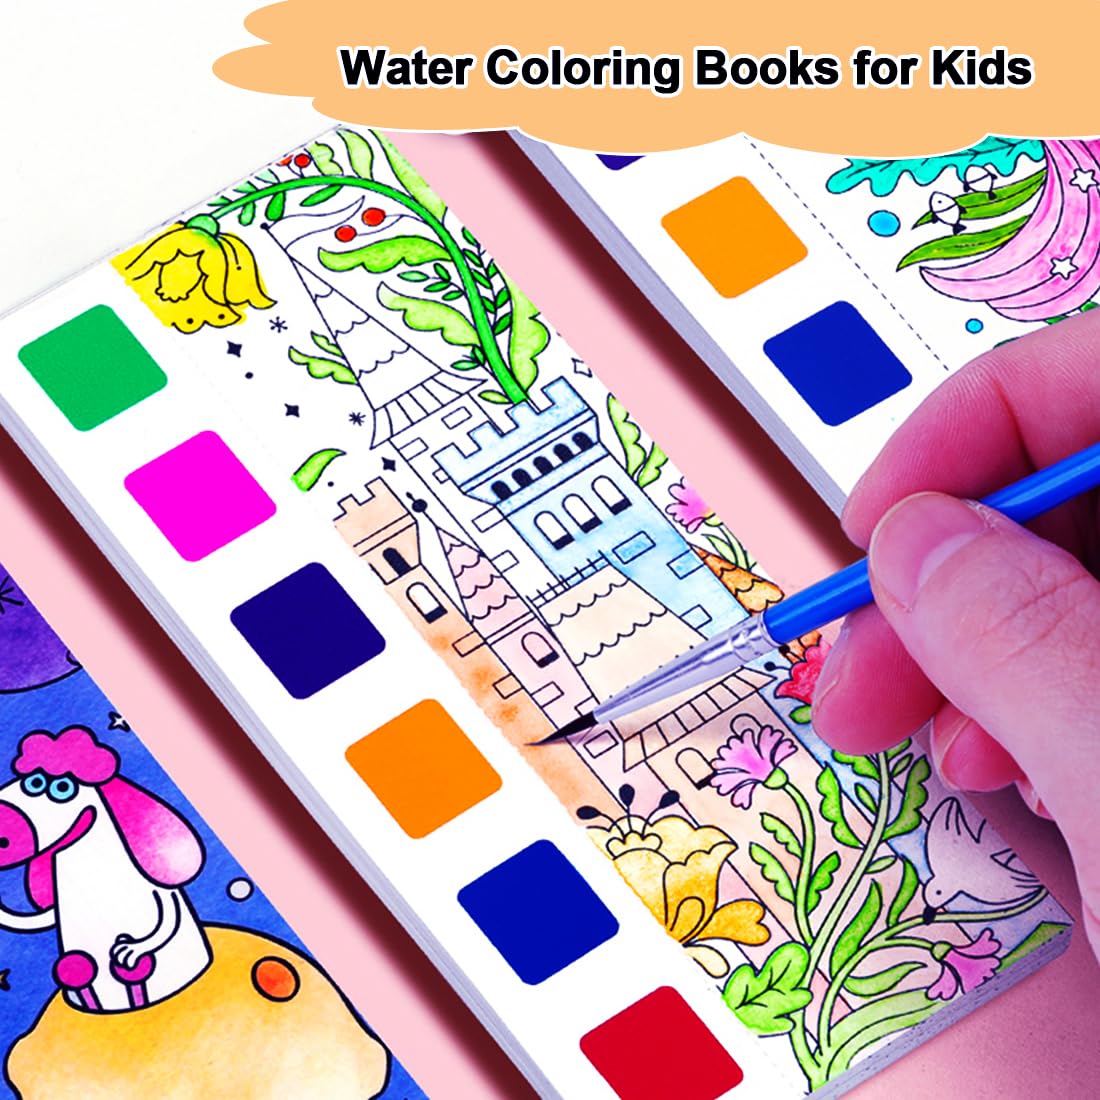  BAOXUE Water Coloring Books for Kids Ages 3 4 5 6 7 8,Pocket  Watercolor Painting Book for Toddlers,Arts and Crafts for Boys Girls,Paint  with Water Colors Book Kit,Kids Travel Art Set